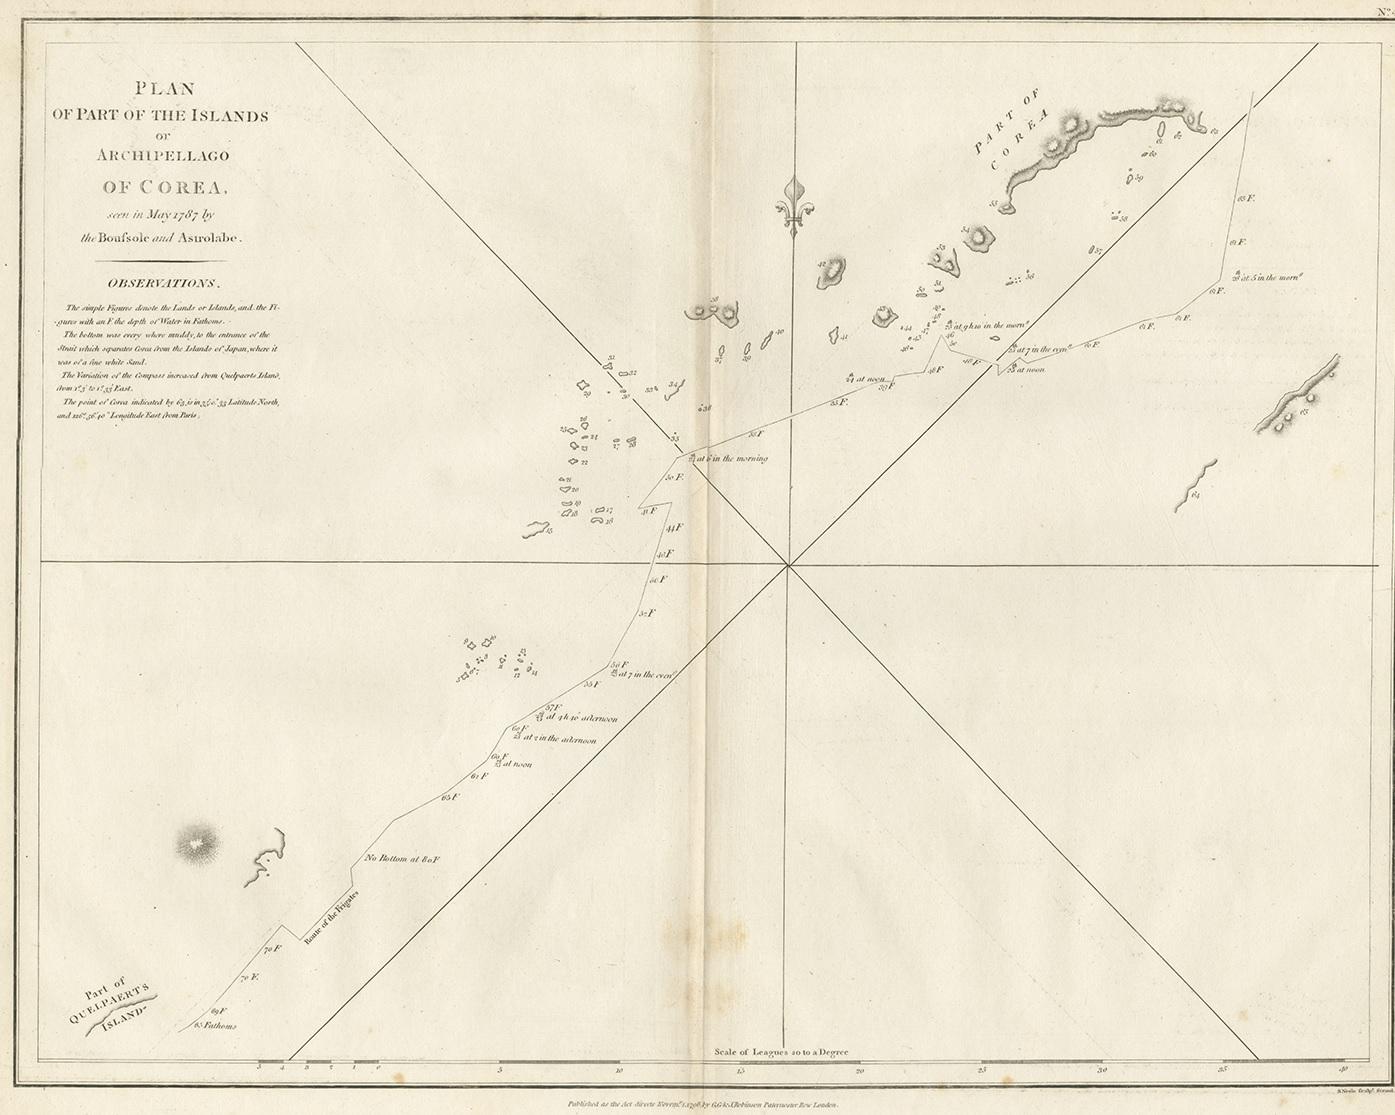 Antique map titled 'Plan of Part of the Islands or Archipellago of Corea'. This map depicts part of the Korean Archipelago and originates from Charts and Plates to La Pérouse's Voyage' by Jean Francois de Galaup La Perouse. Printed in London by G.G.